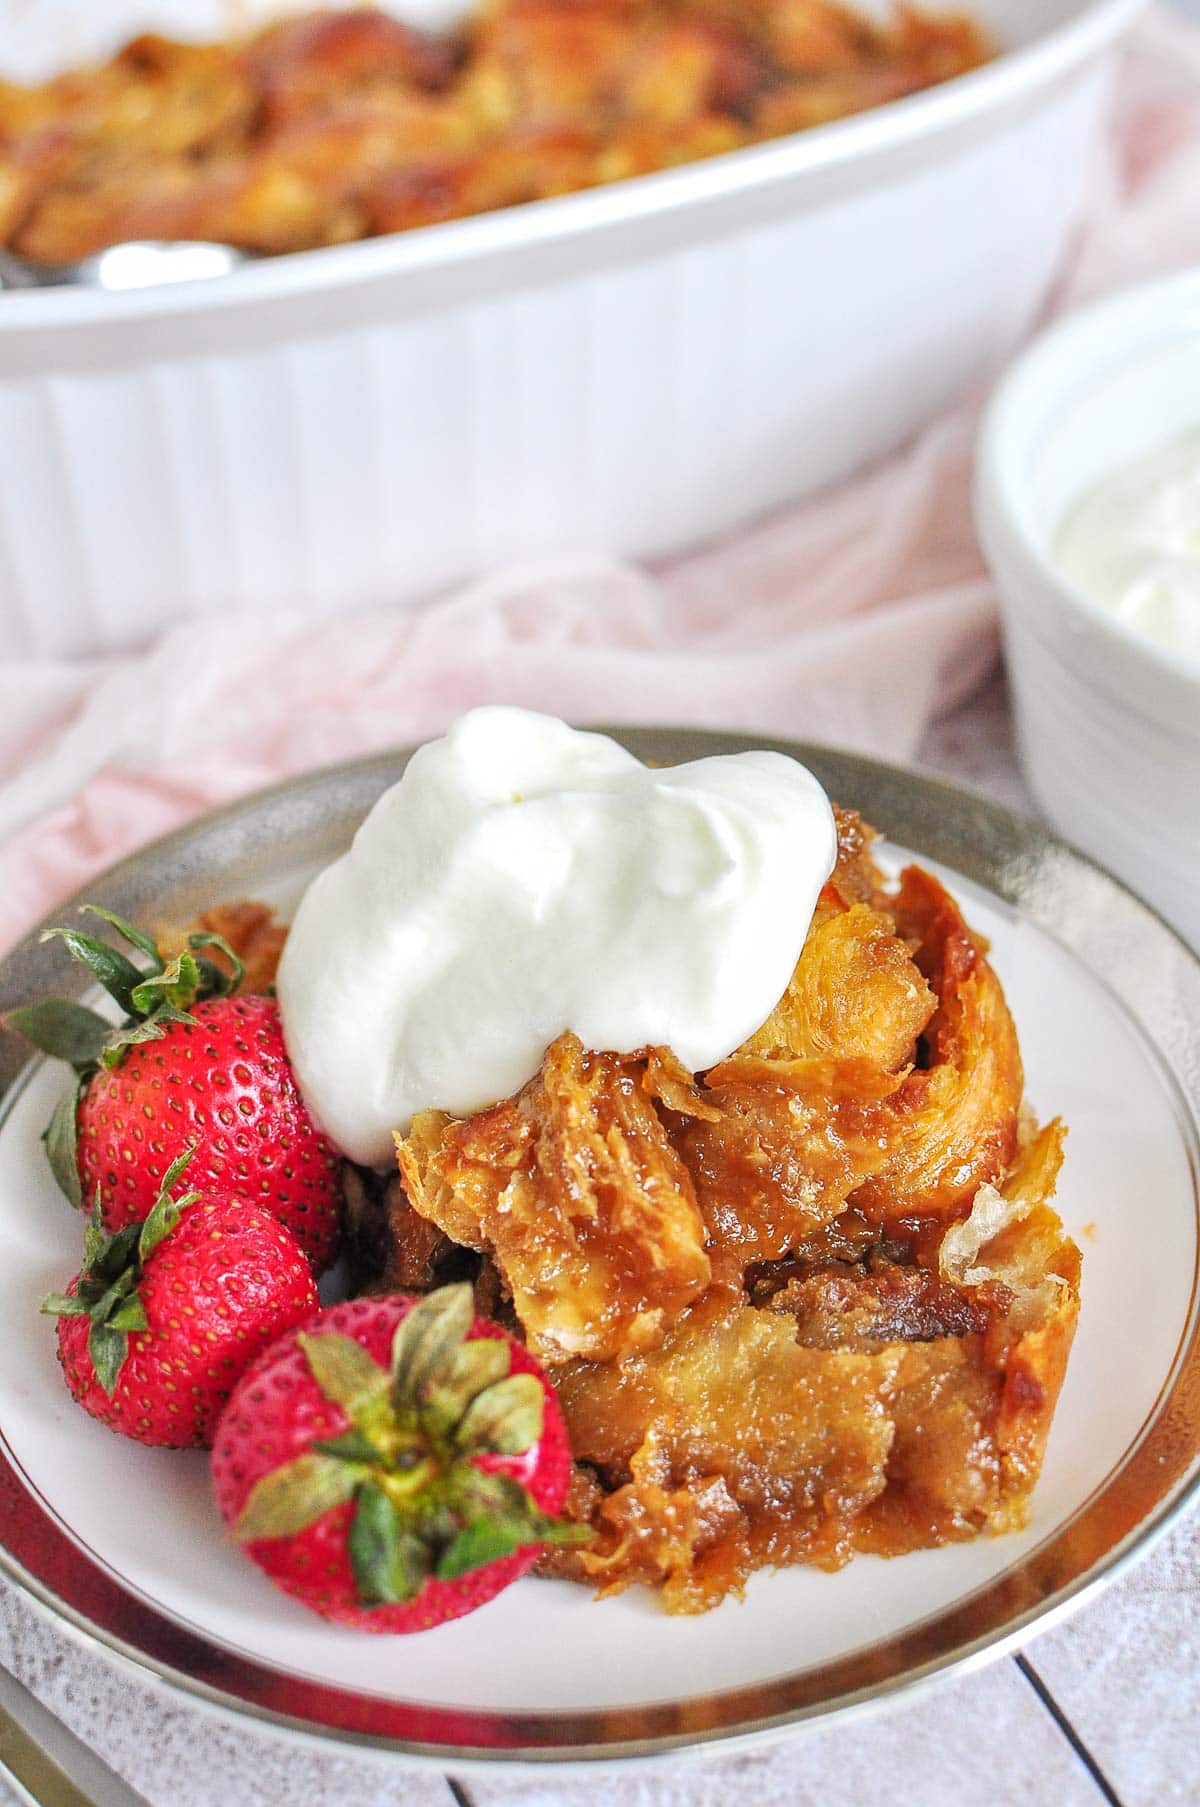 In dish and on plate with whipped cream.